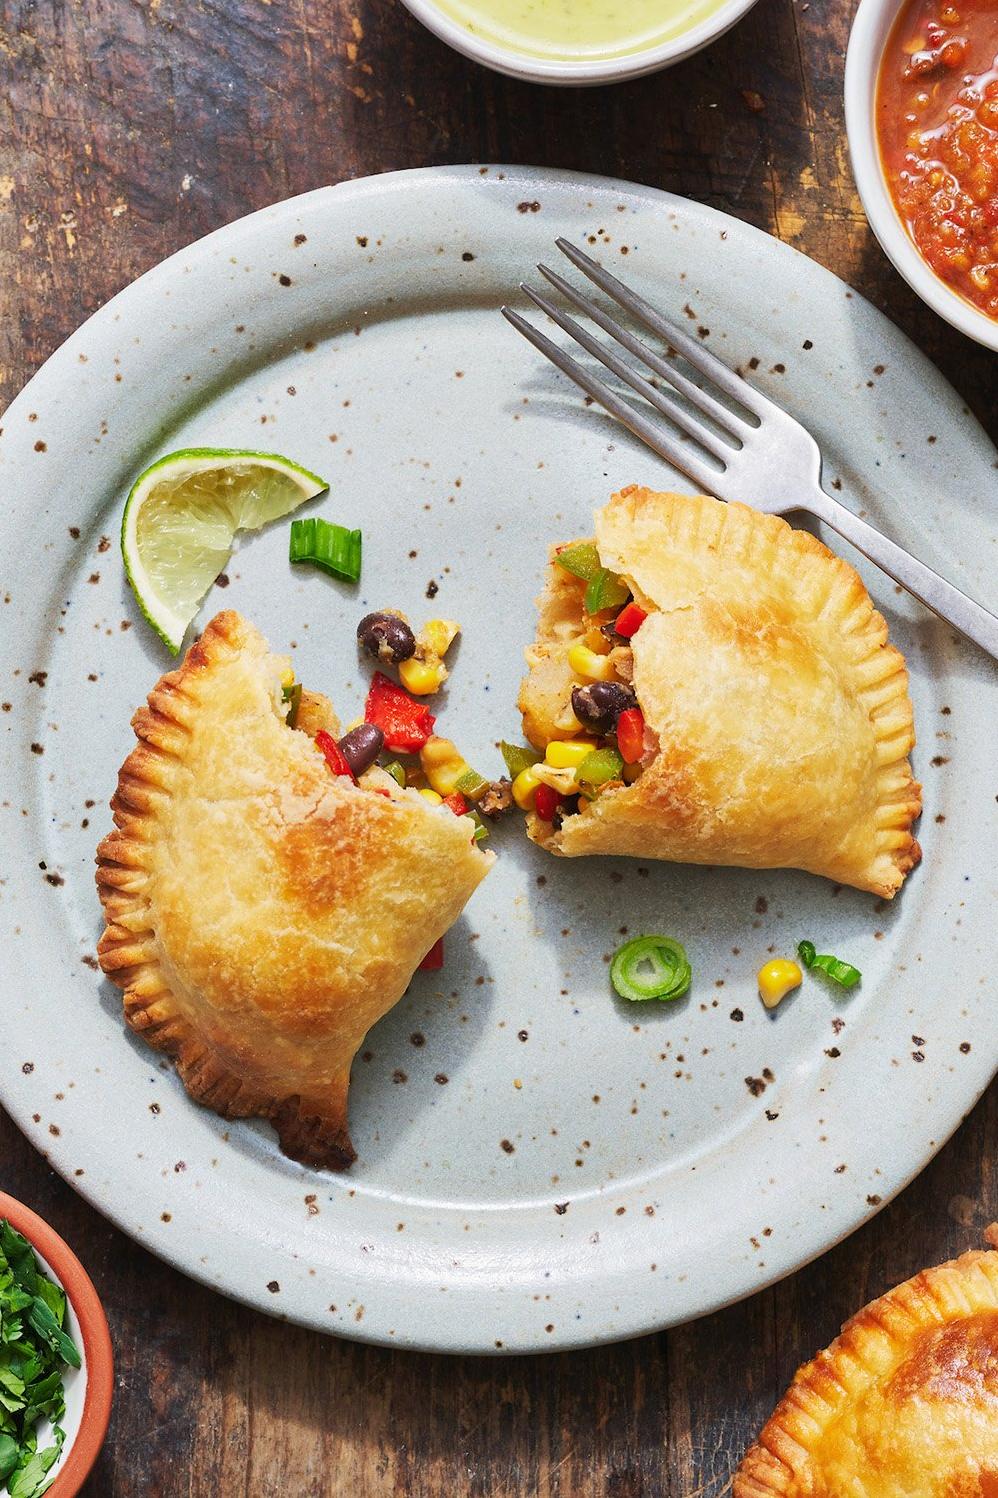  These savory vegetable empanadas have a beautiful golden color that will make your mouth water!